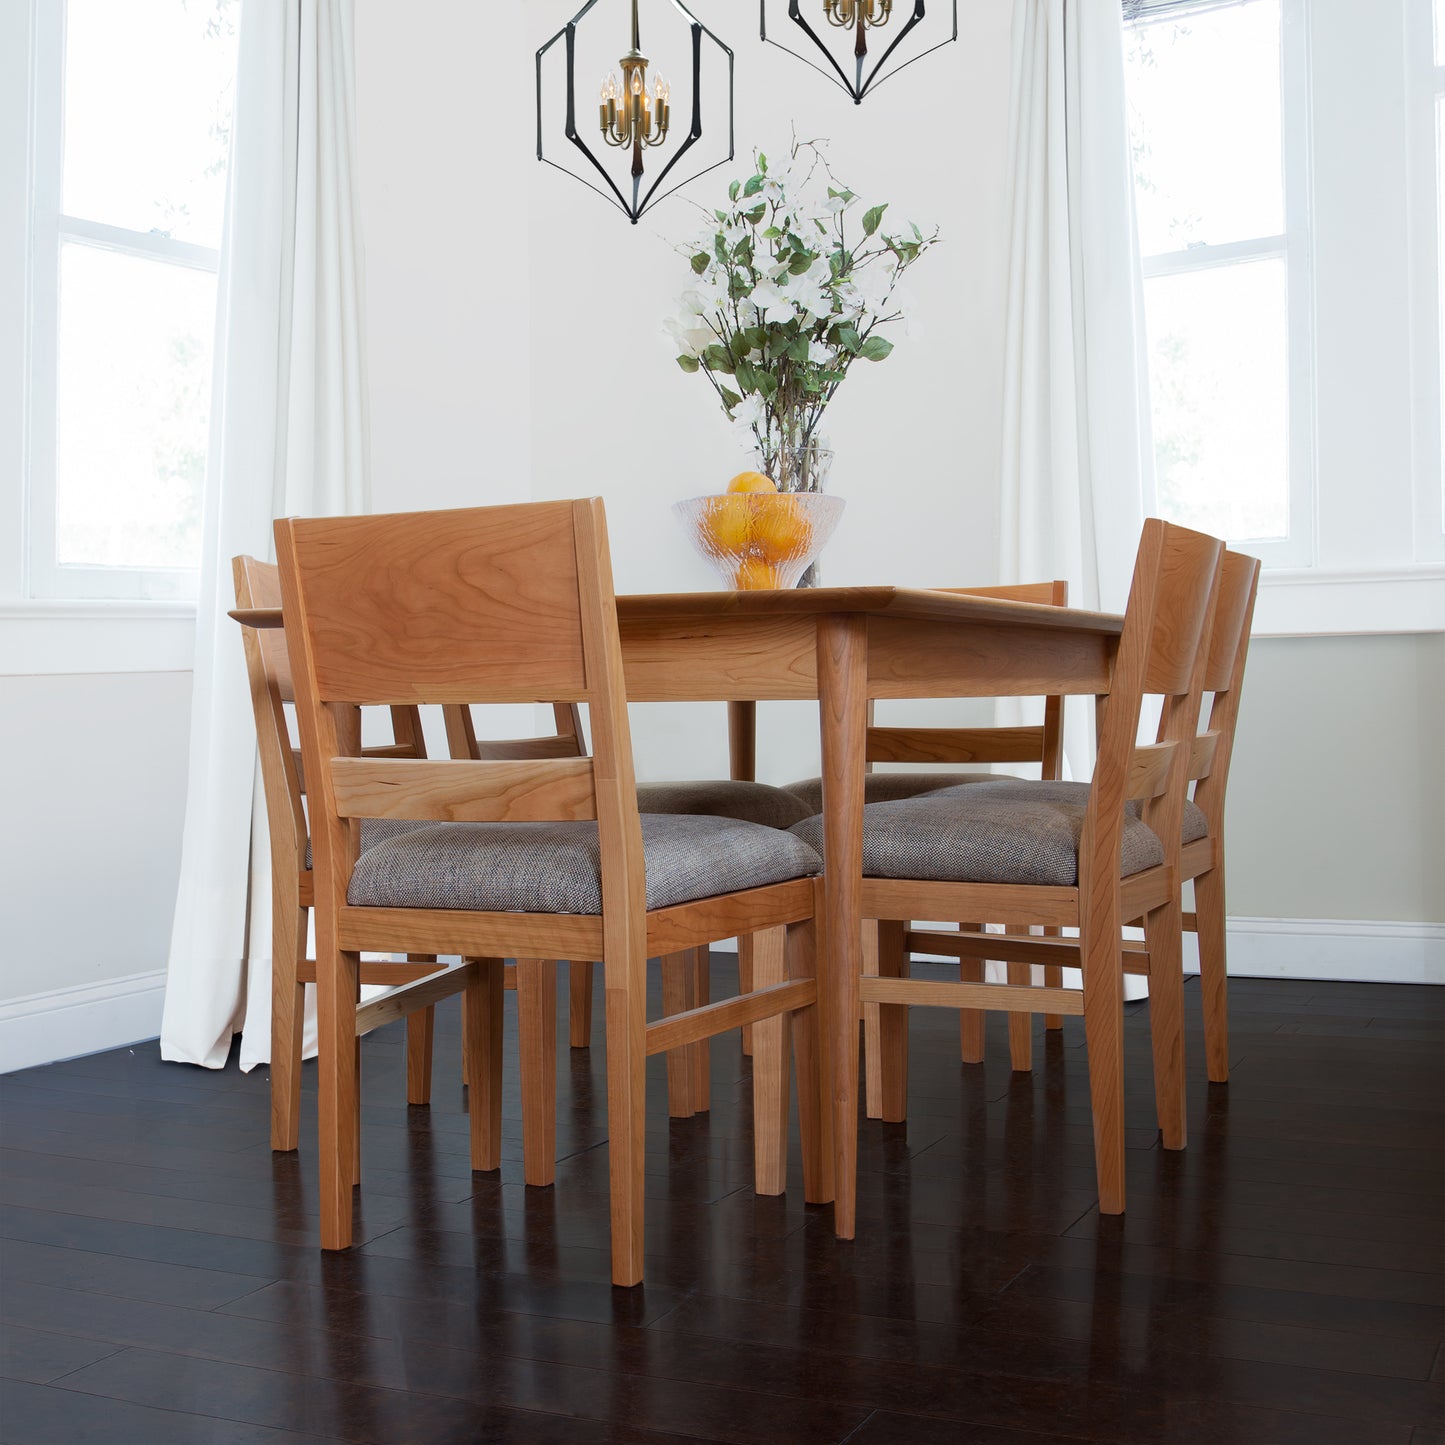 A dining room with a Burke Modern Dining Table and chairs, showcasing exquisite craftsmanship by Vermont Woods Studios.